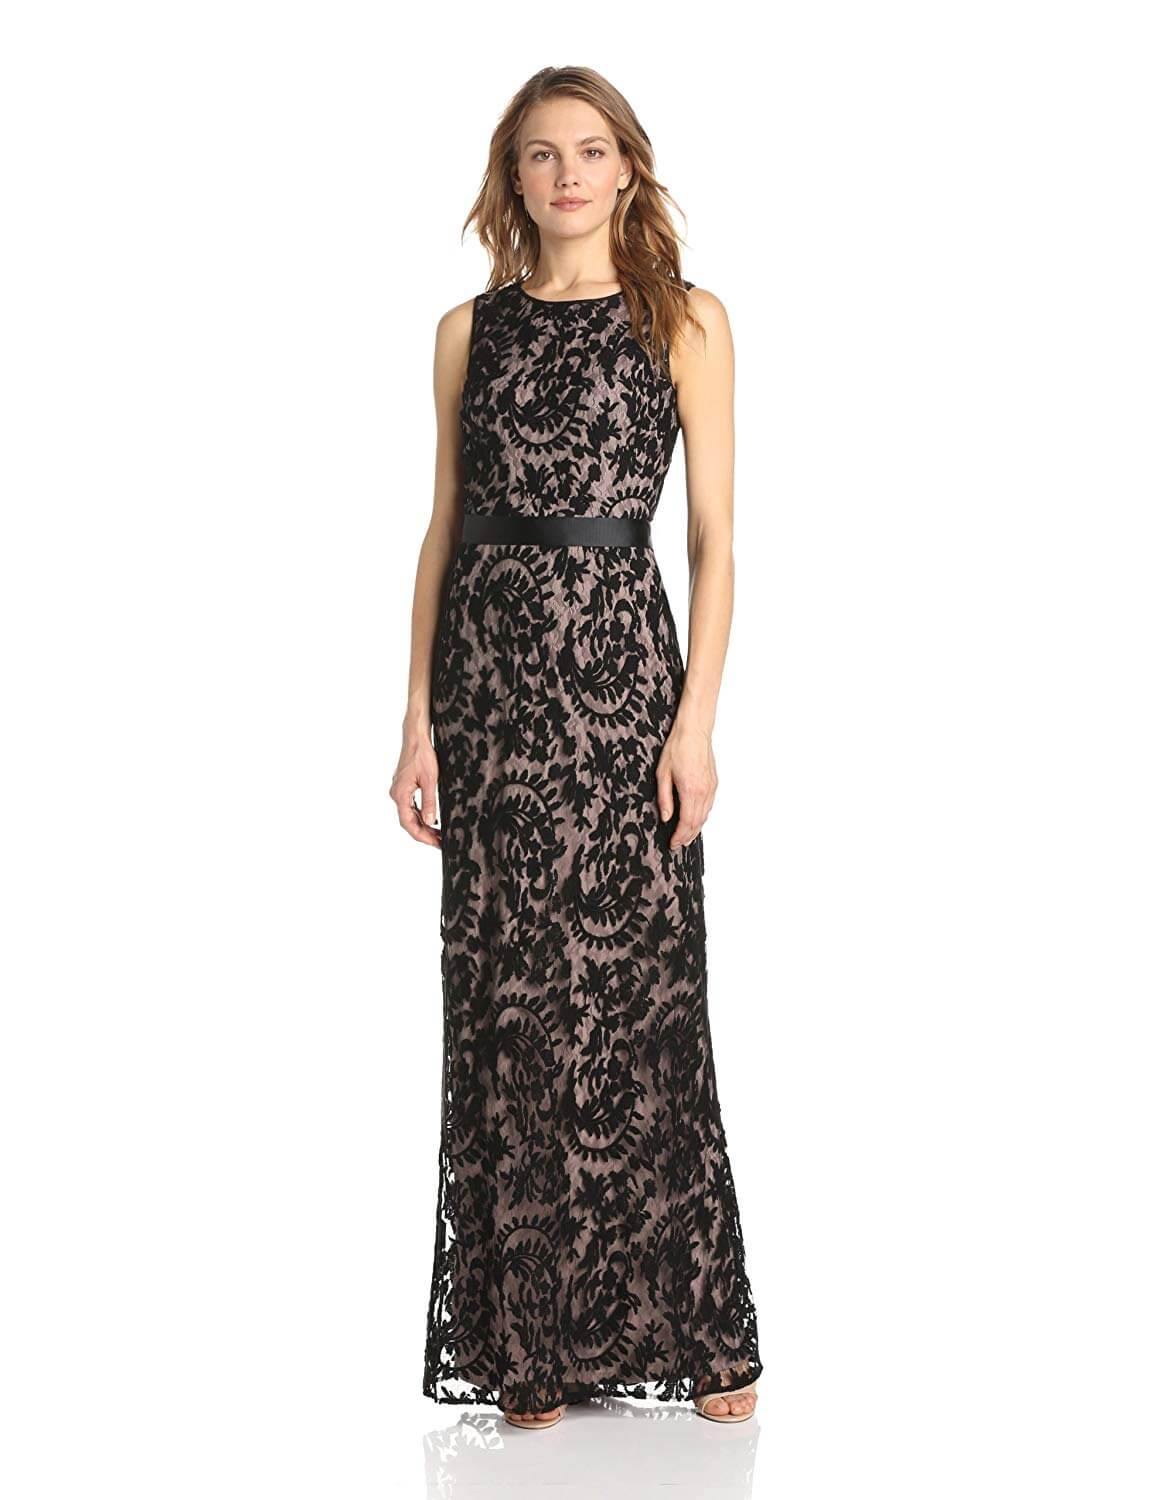 Adrianna Papell Long Formal Sleeveless Lace Dress - The Dress Outlet Adrianna Papell